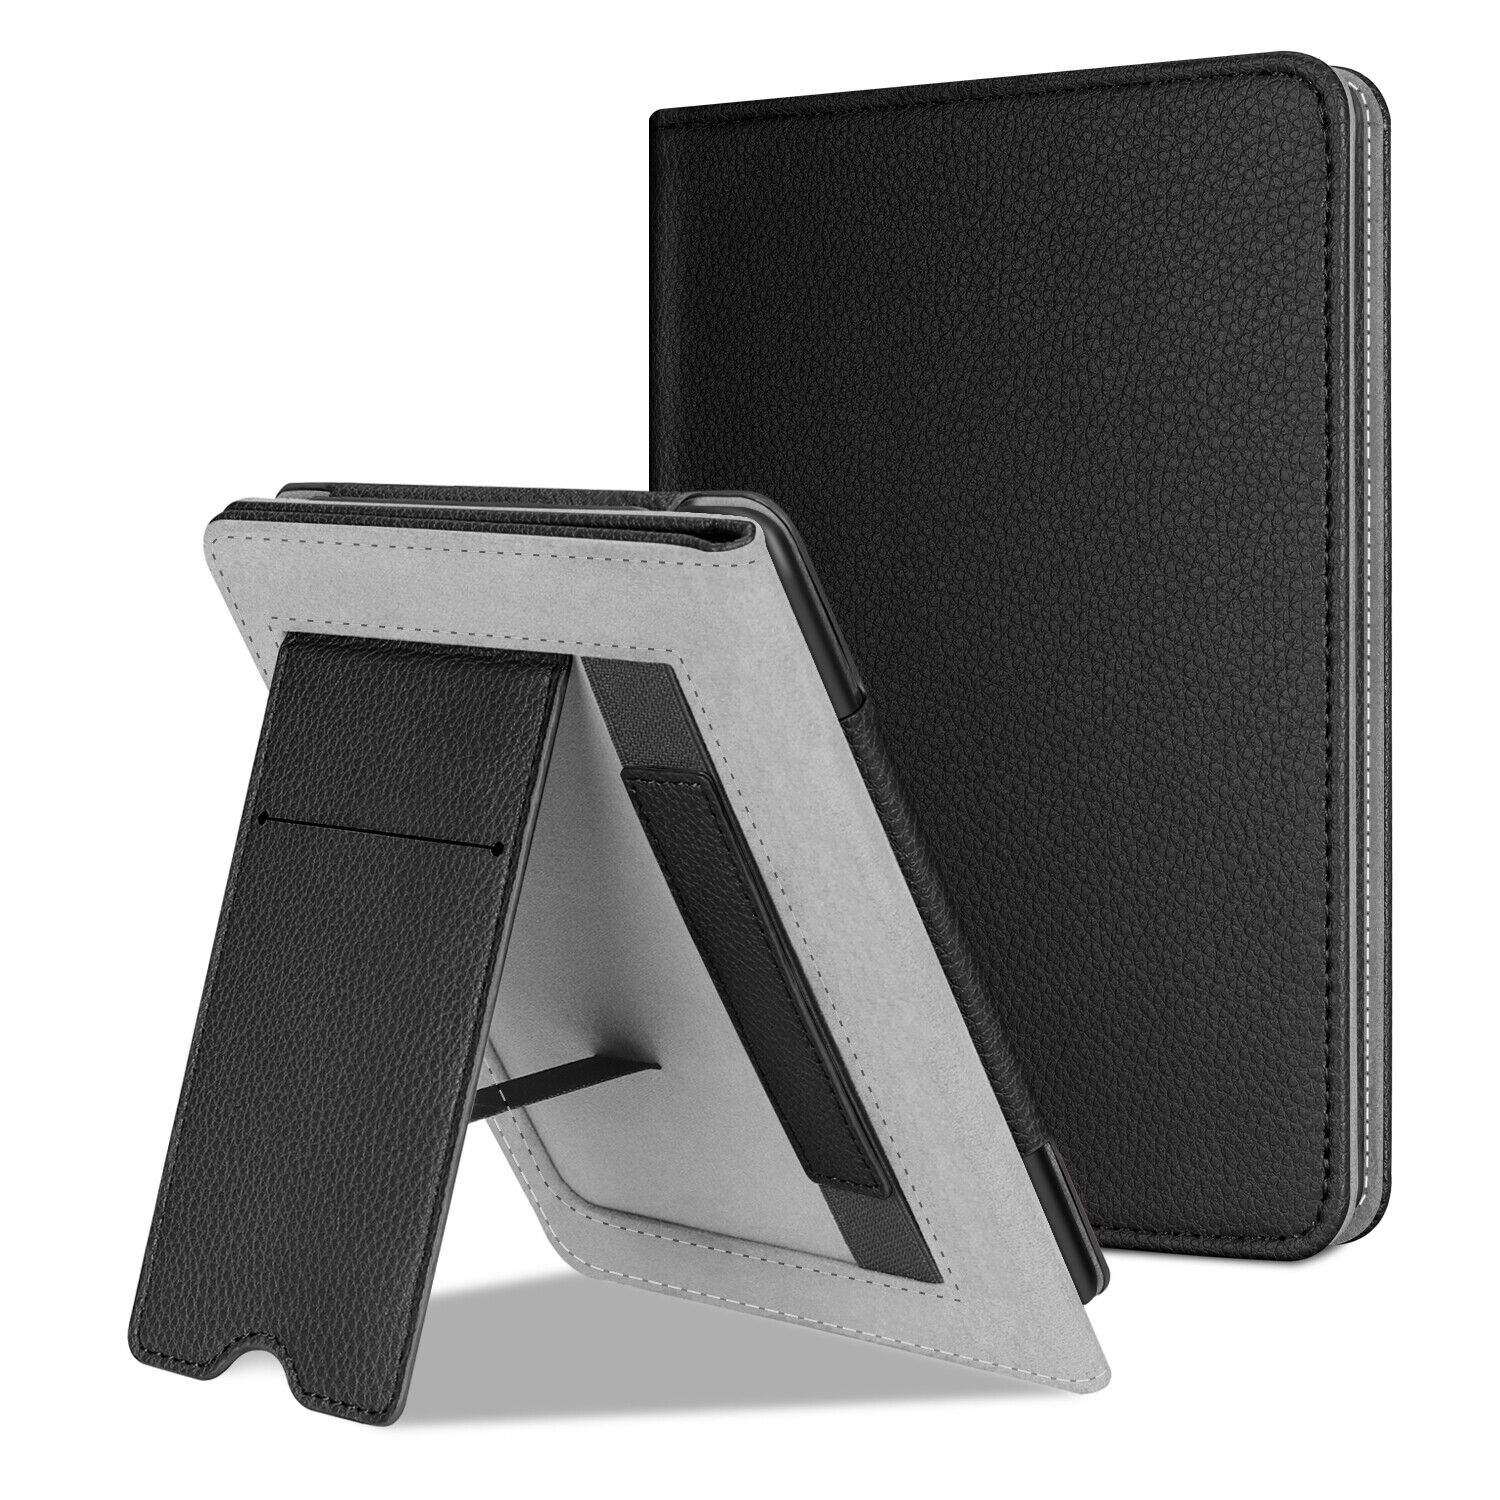 Stand Case For Kindle Paperwhite 10th Gen 2018 Sleeve Cover+Hand Strap Card Slot